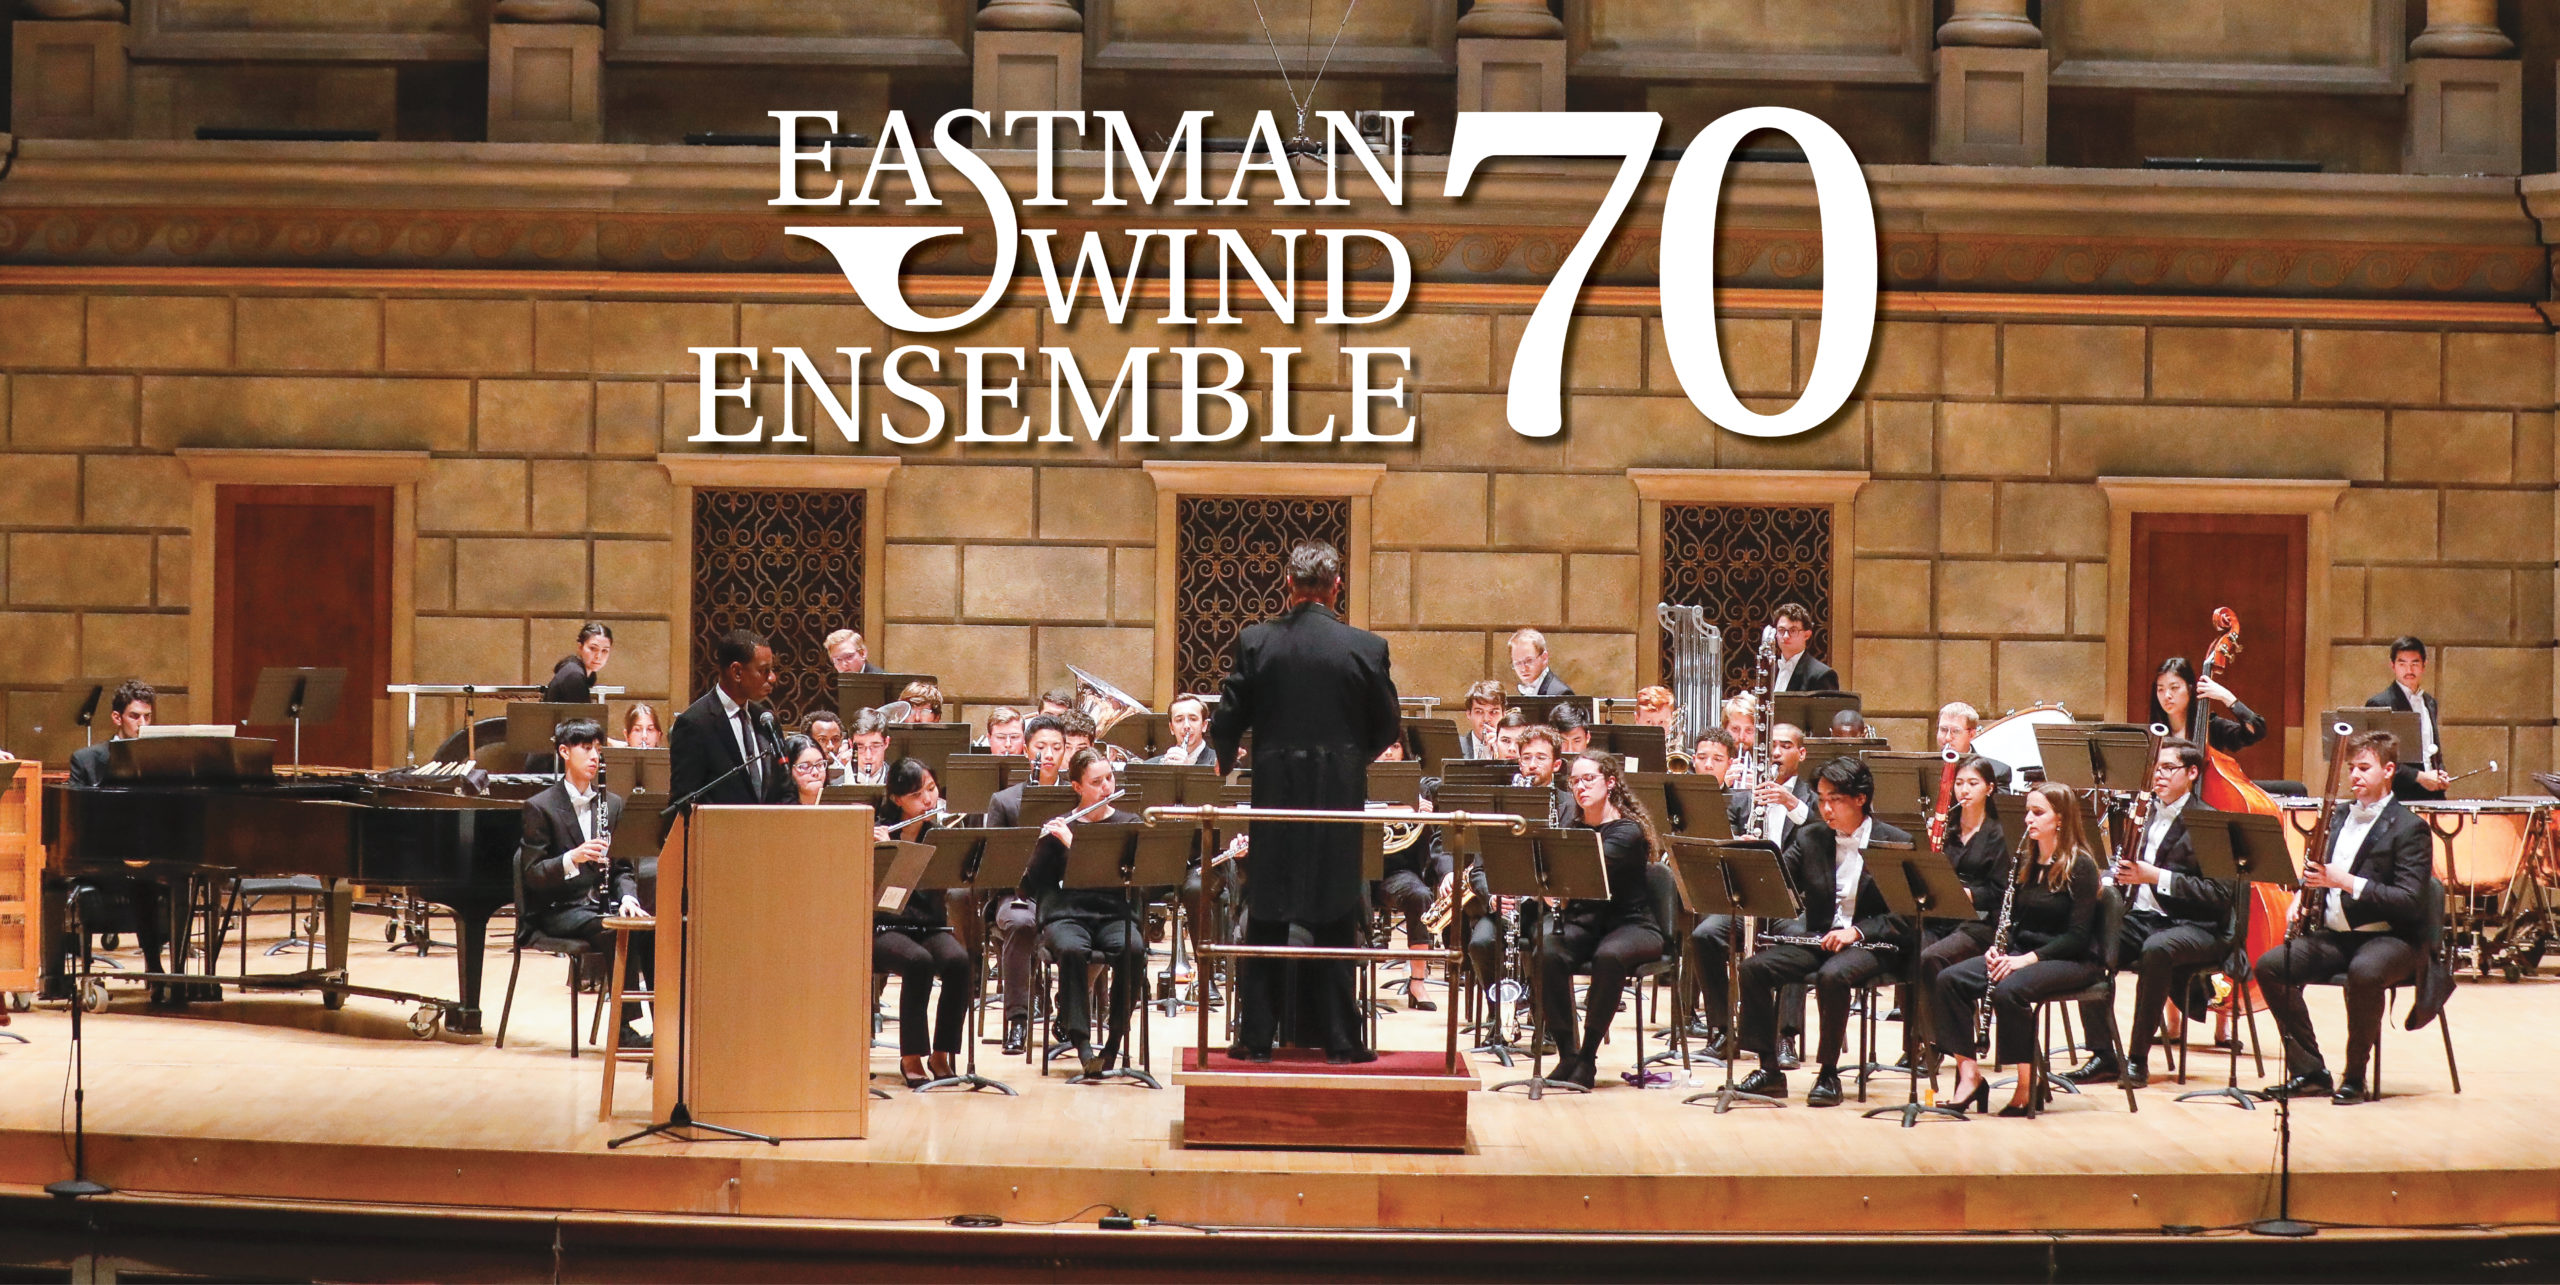 Eastman Wind Ensemble Celebrates 70 Years of Artistry, Innovation, and